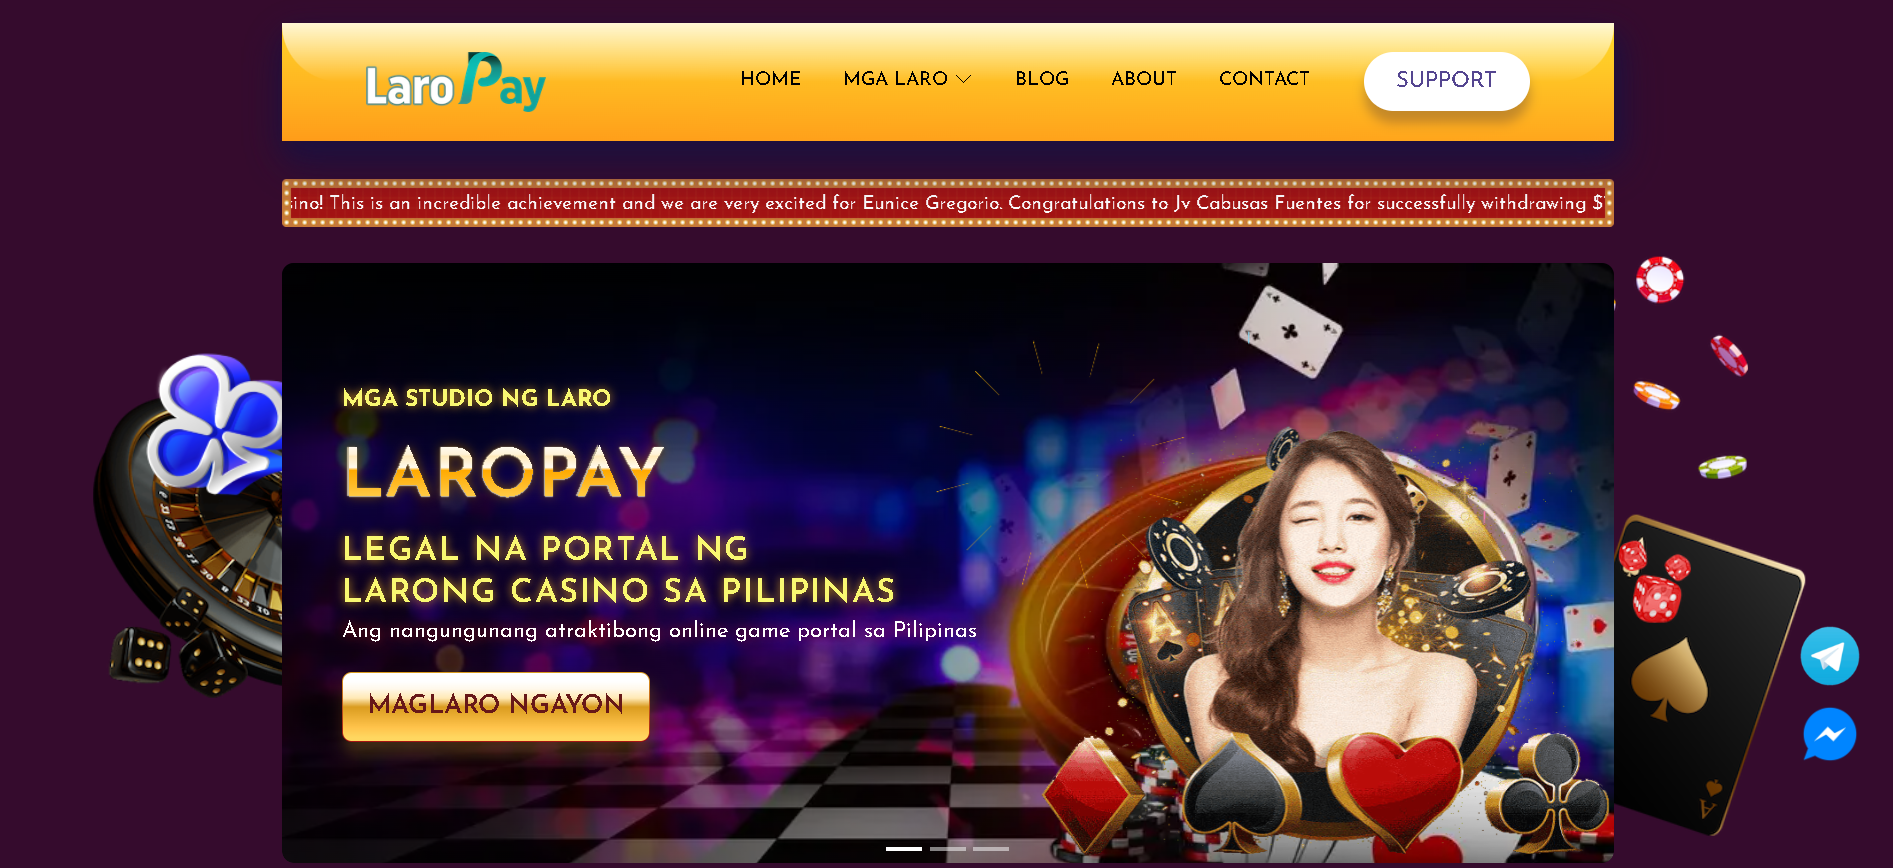 LaroPay: Legal Online Casino Gaming in the Philippines